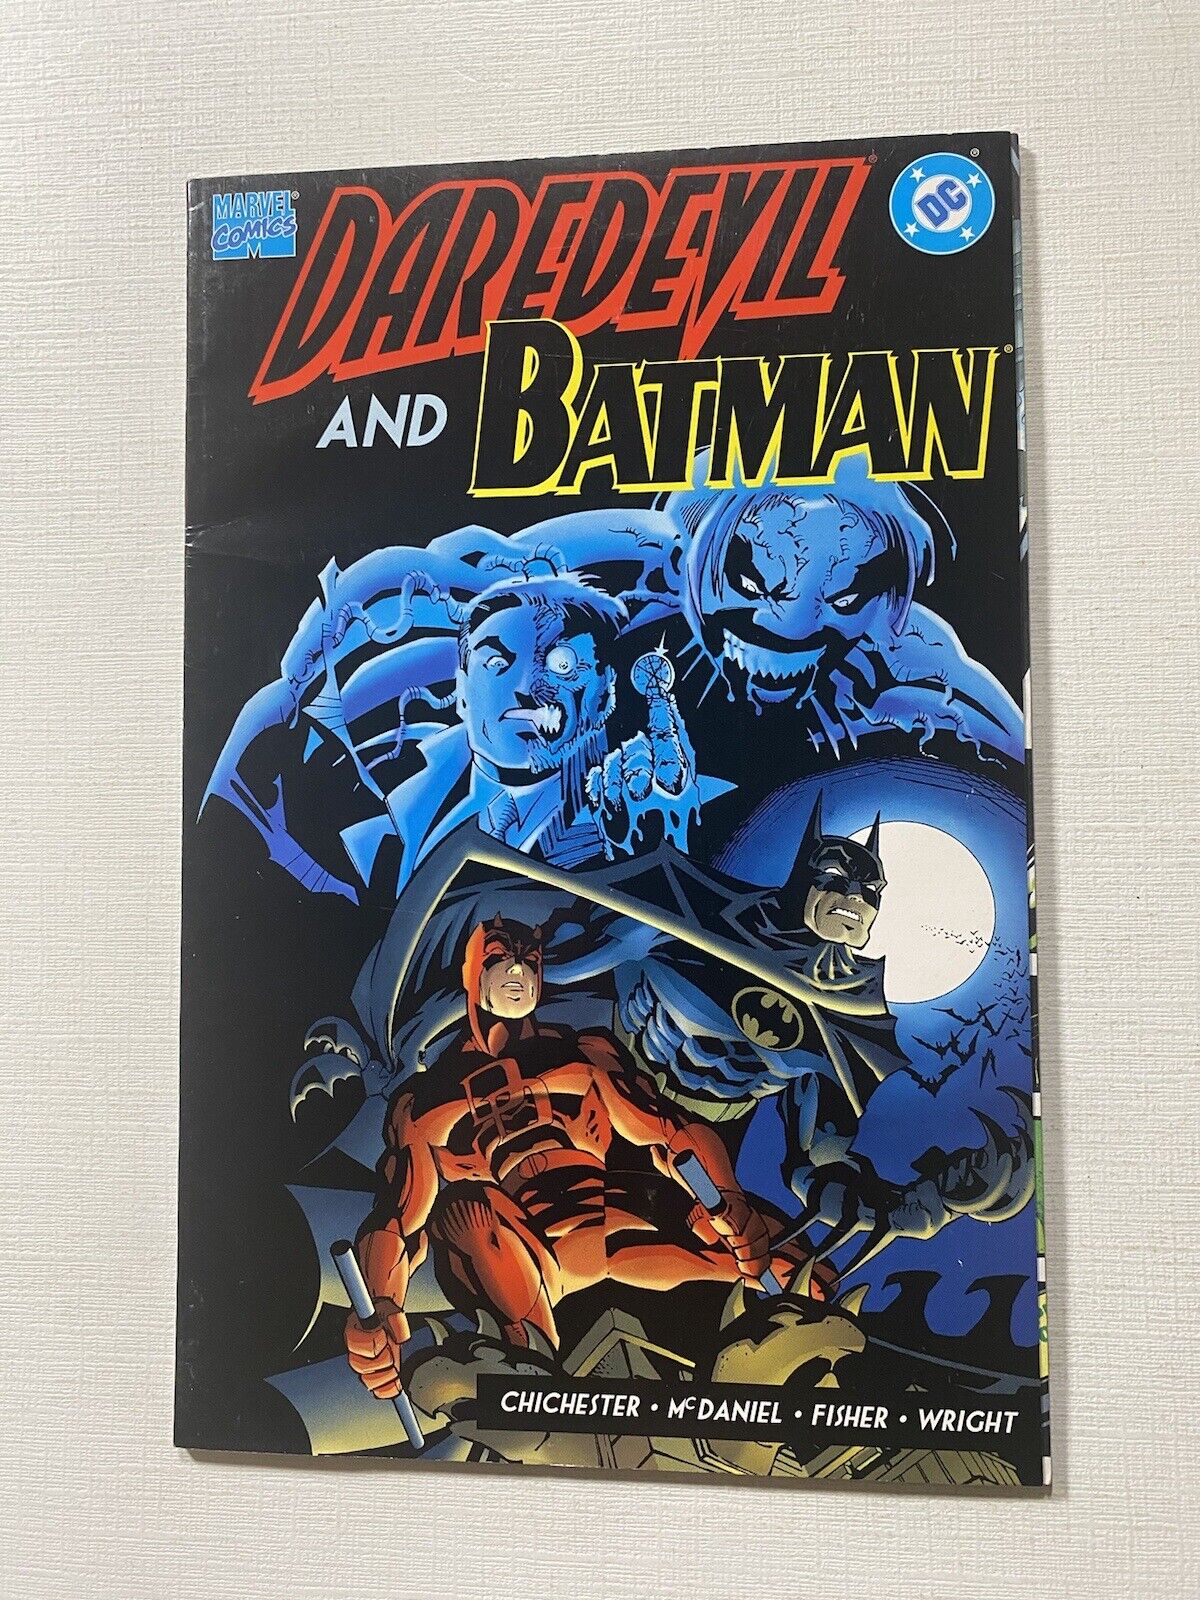 Daredevil And Batman #1 (Marvel/DC, 1997) In FN Condition, One Shot